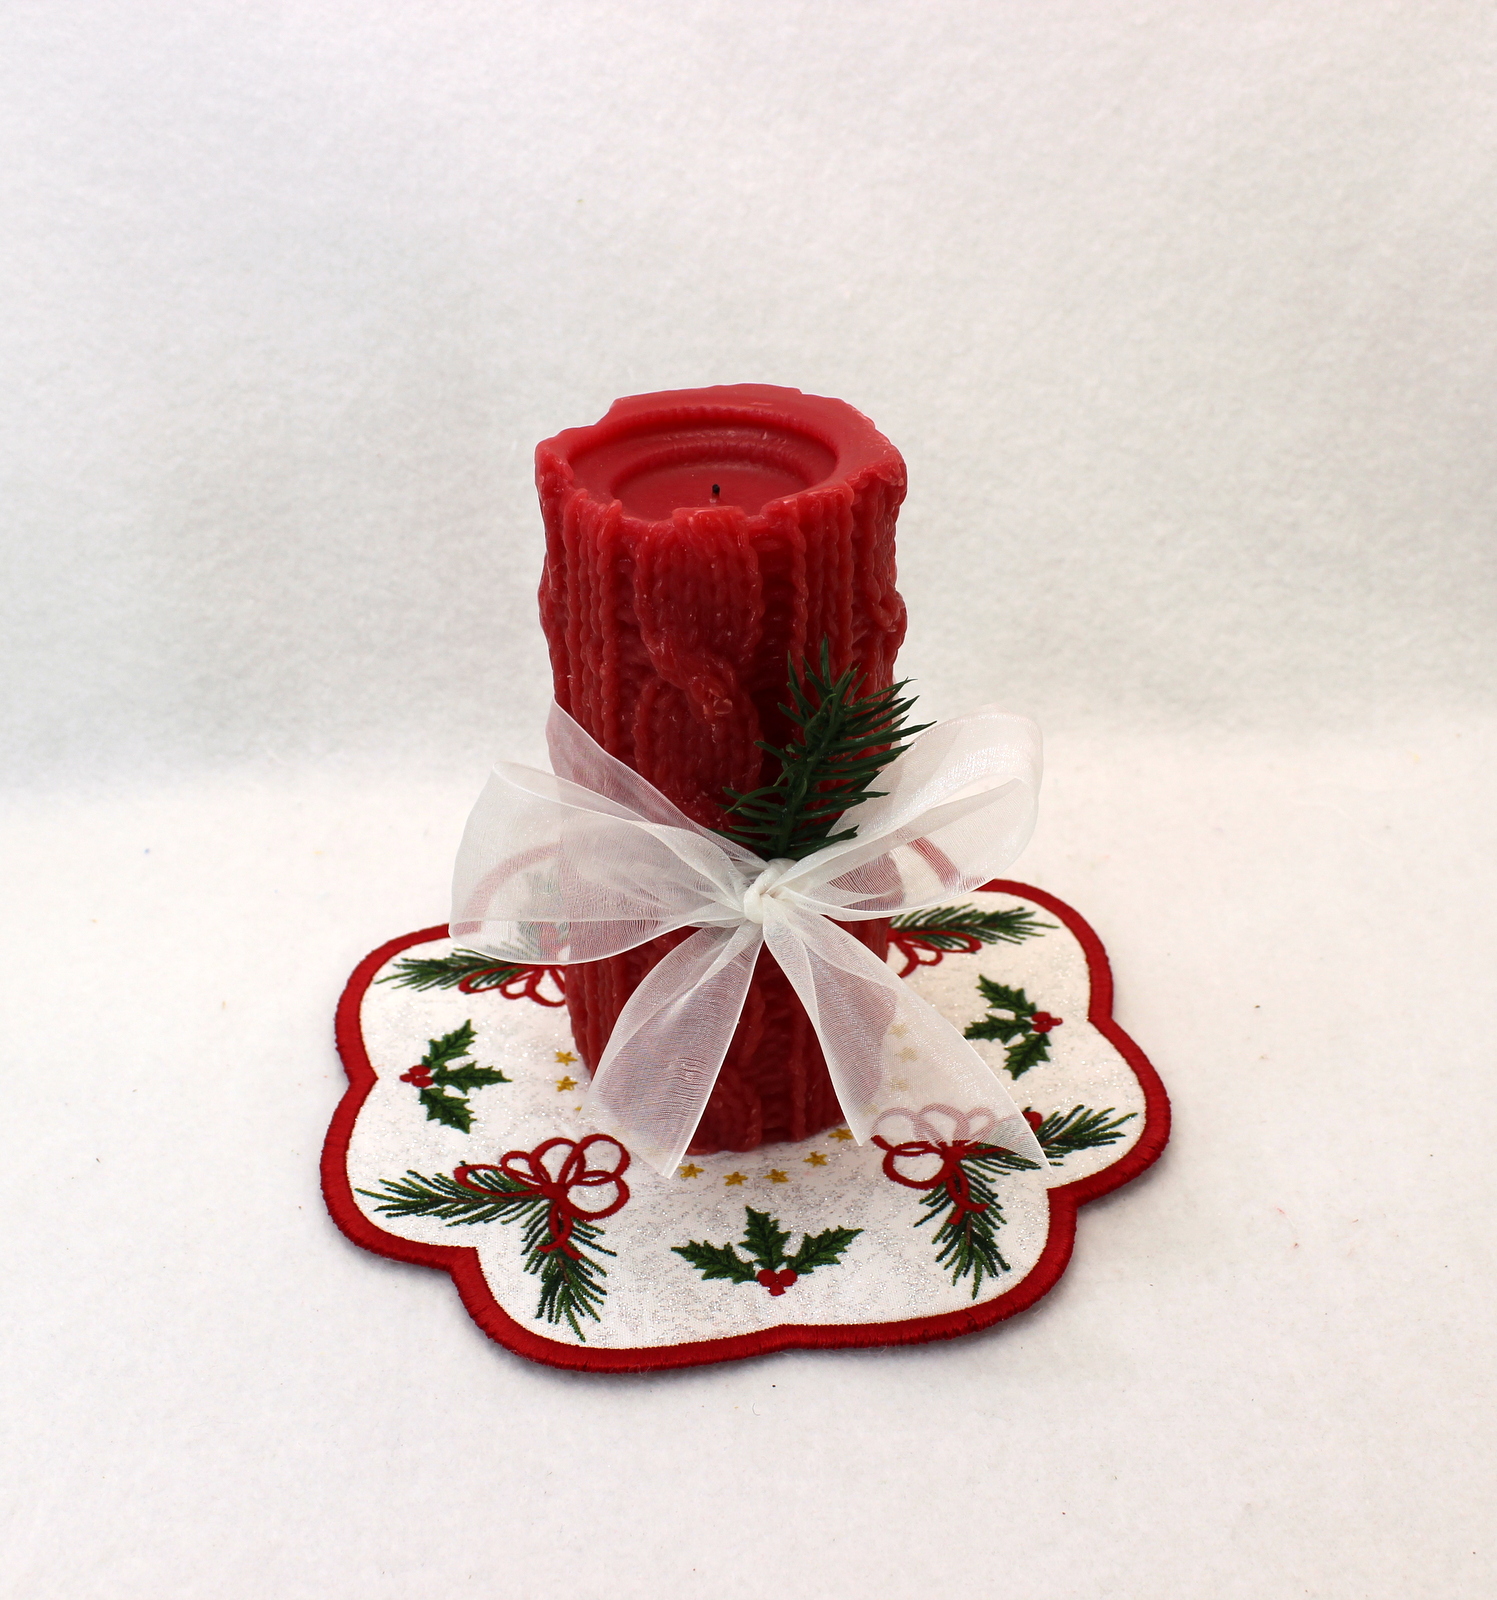 Christmas Candles-2 Light Fill Embroidery Design Pattern